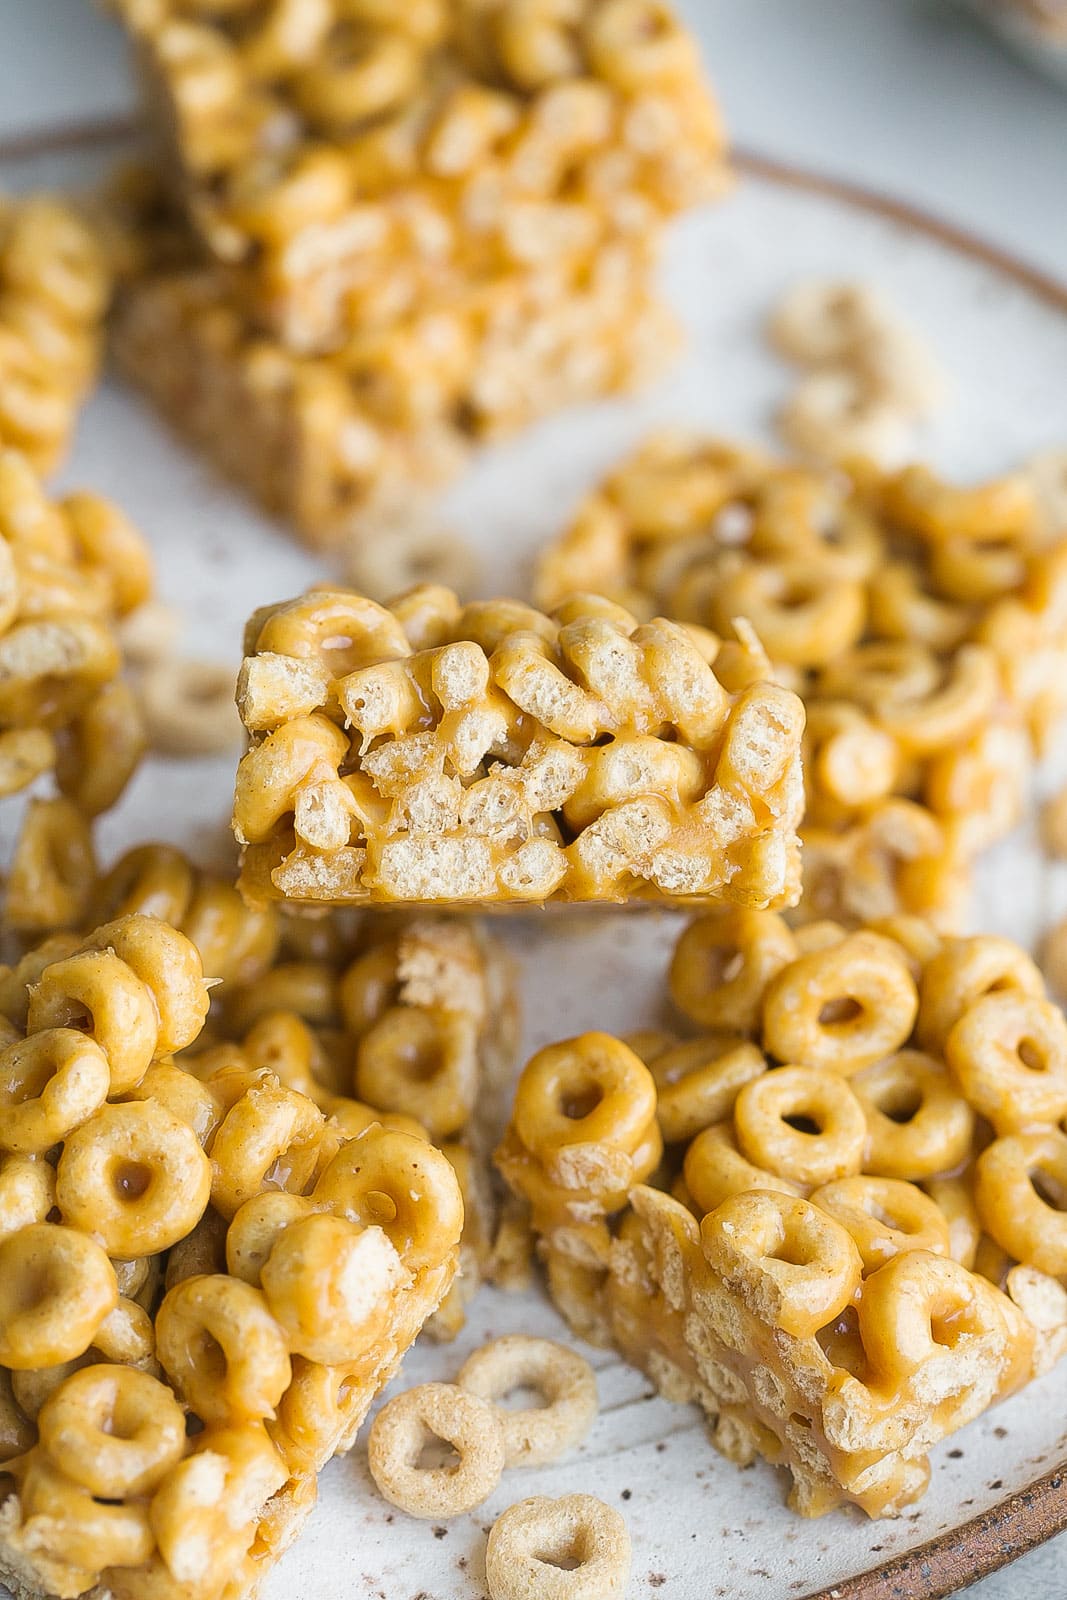 Inside of peanut butter treat bar with Cheerios.